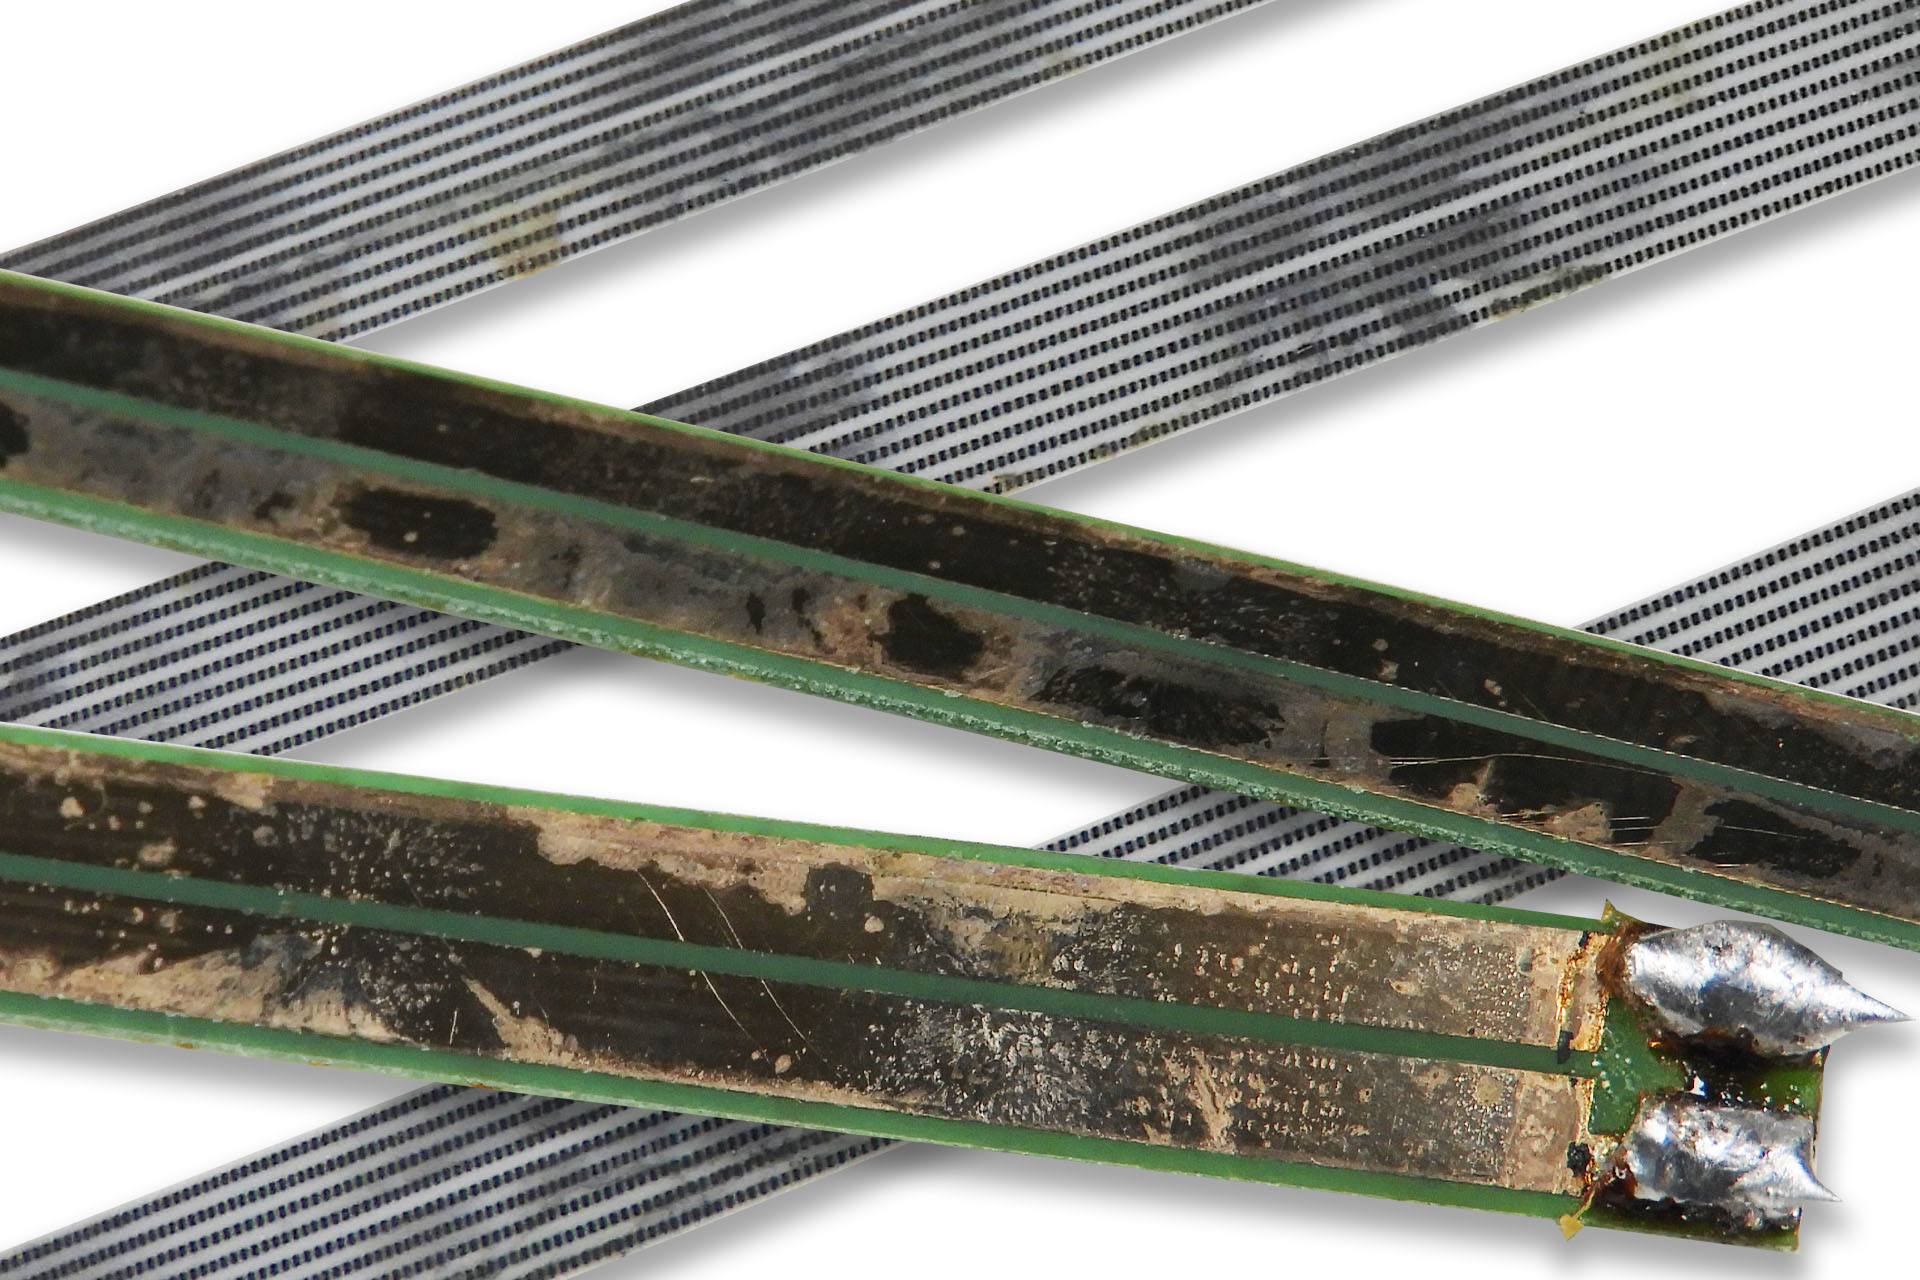 Aged copper tracks and conductive rubber strips in JX-8P aftertouch assembly